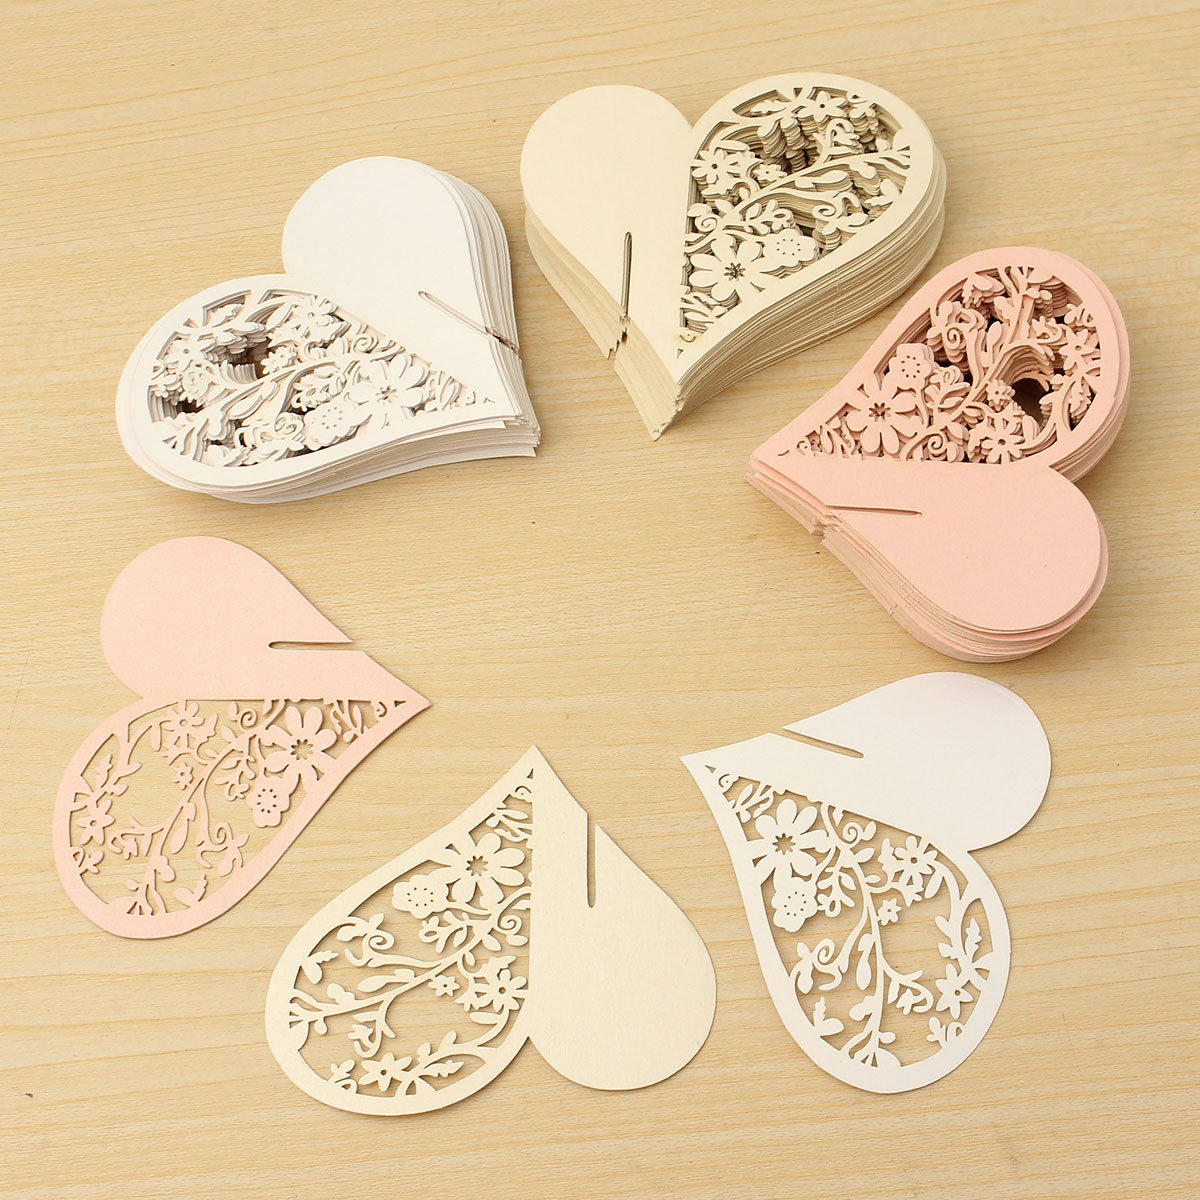 

50Pcs Heart Wedding Name Place Cards Wine Glass Laser Cut Pearlescent Card Party Accessories, Pink white